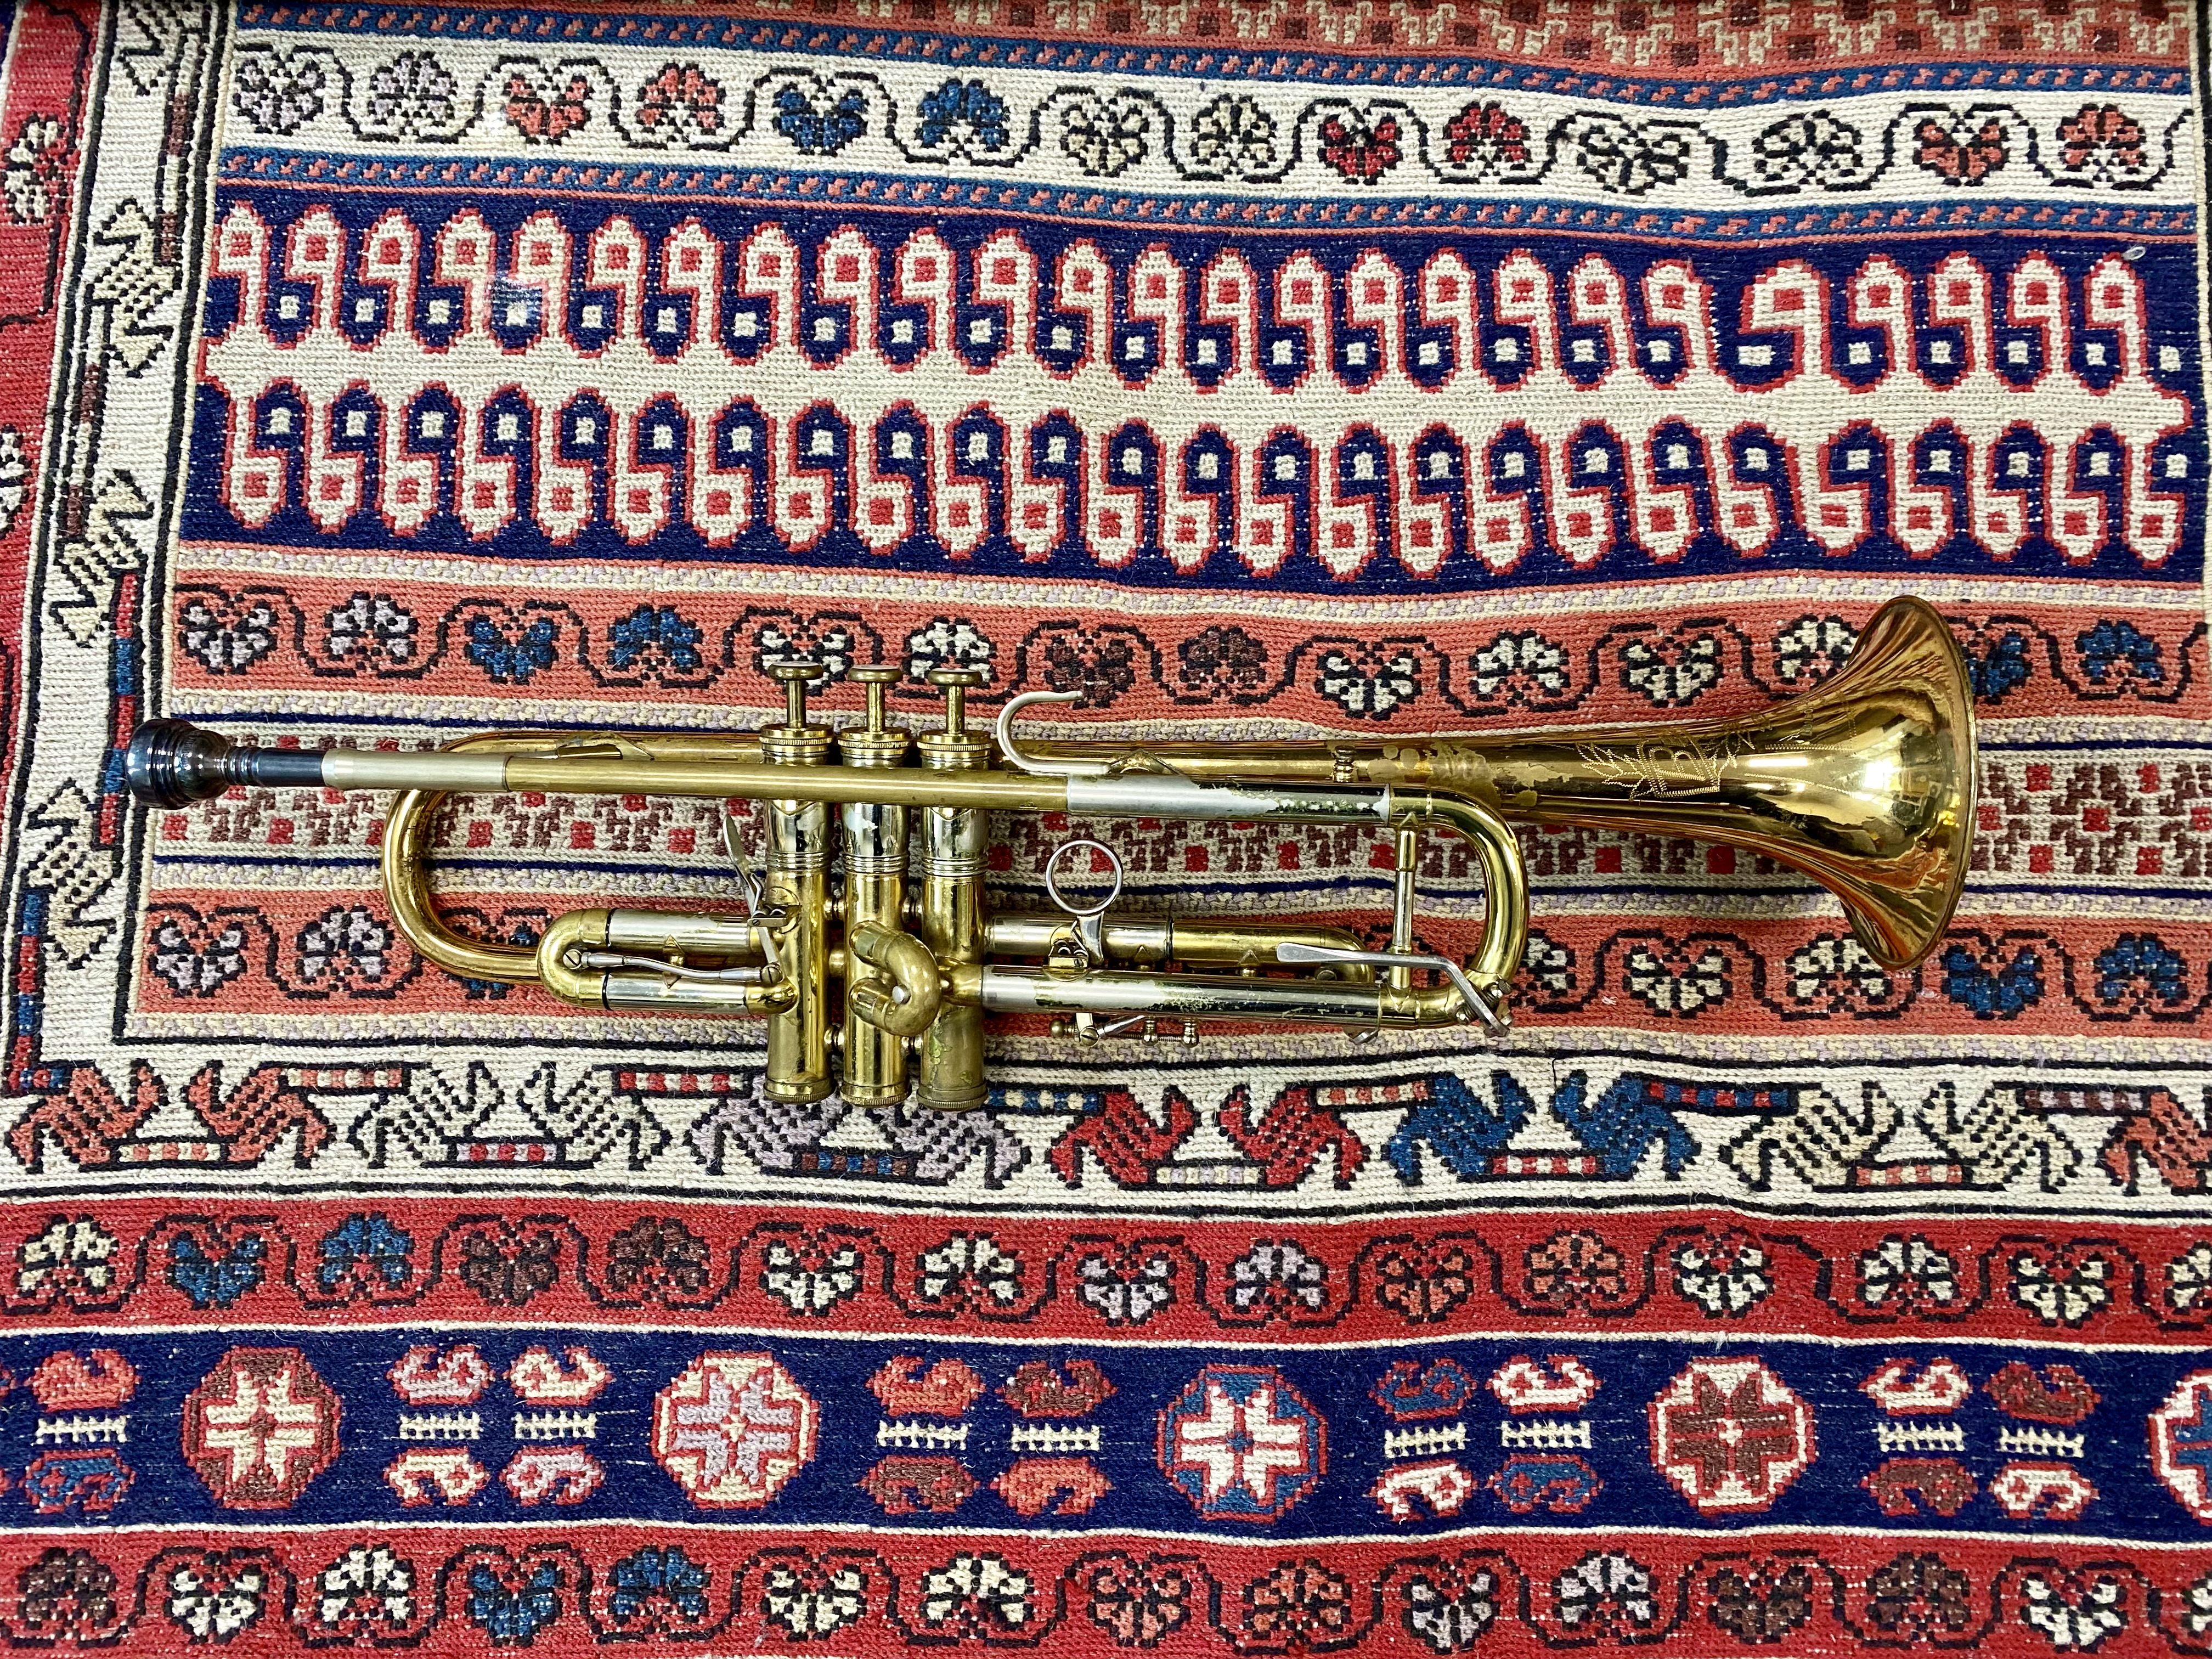 A Besson 10/10 professional Bb trumpet - Image 3 of 4